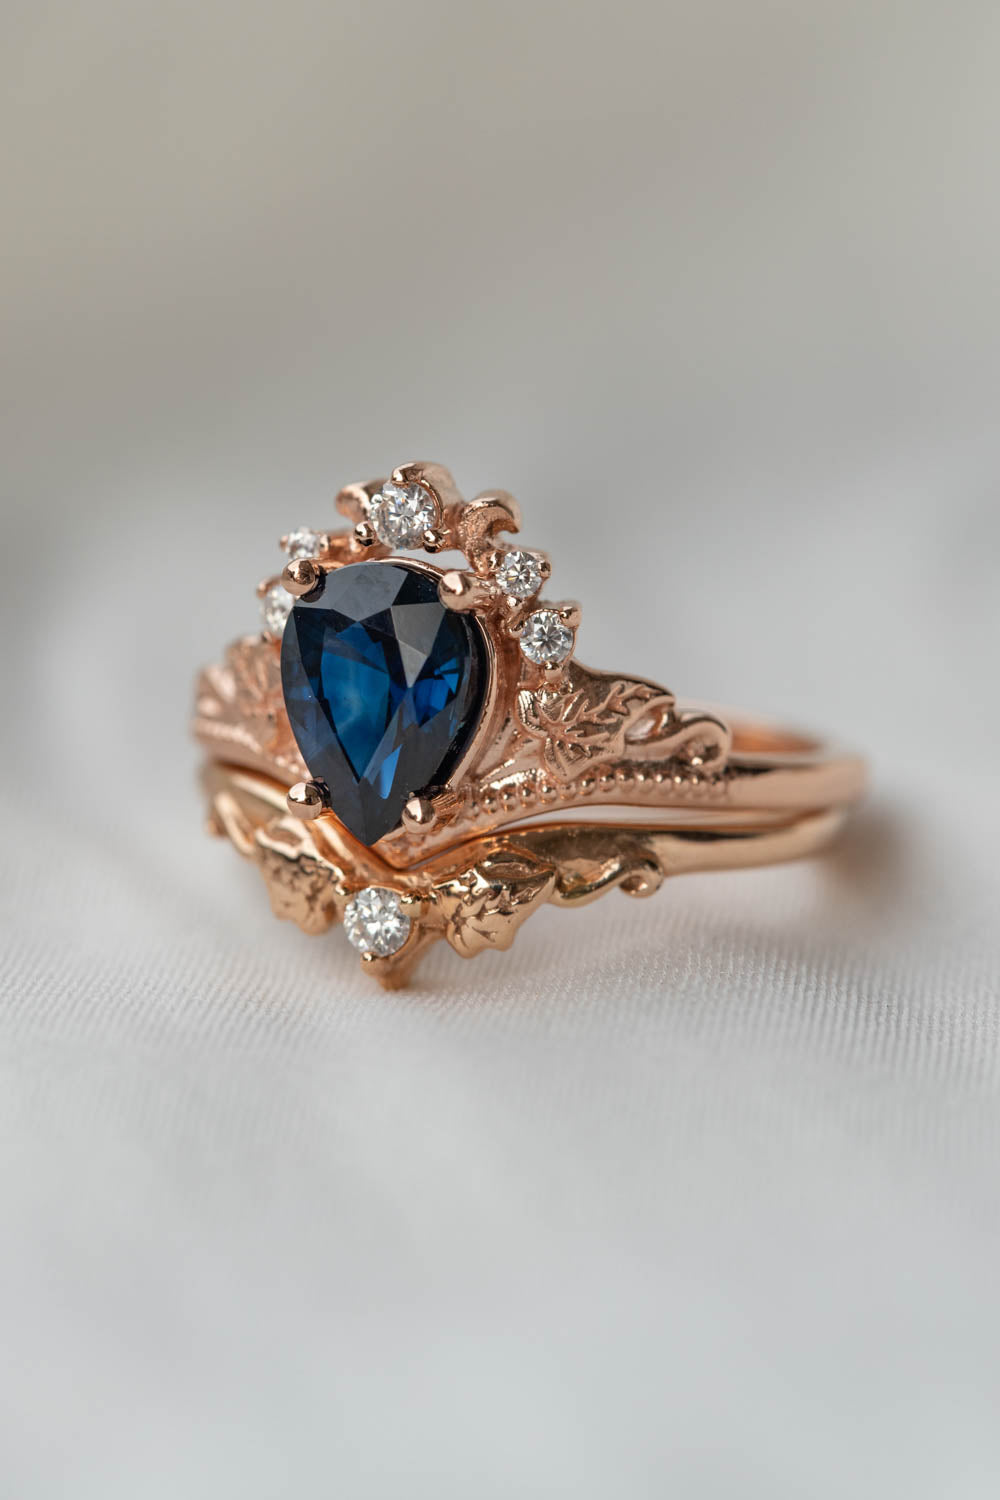 Rose Gold Opal Ring with Diamond Shaped Wedding Ring Set - Coolring Jewelry